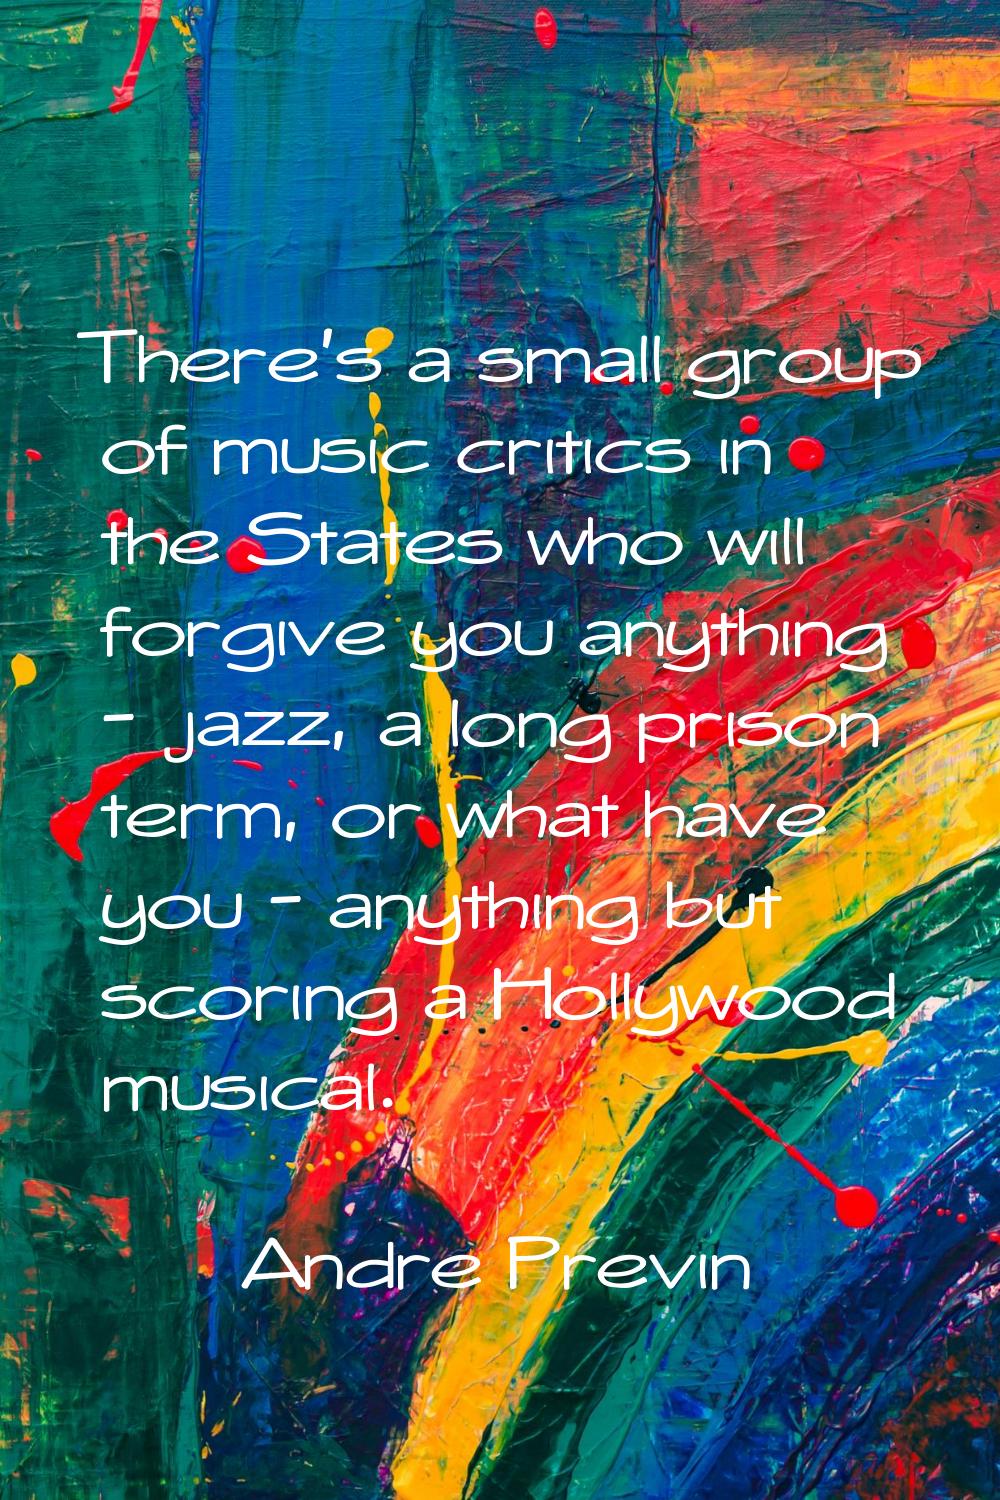 There's a small group of music critics in the States who will forgive you anything - jazz, a long p